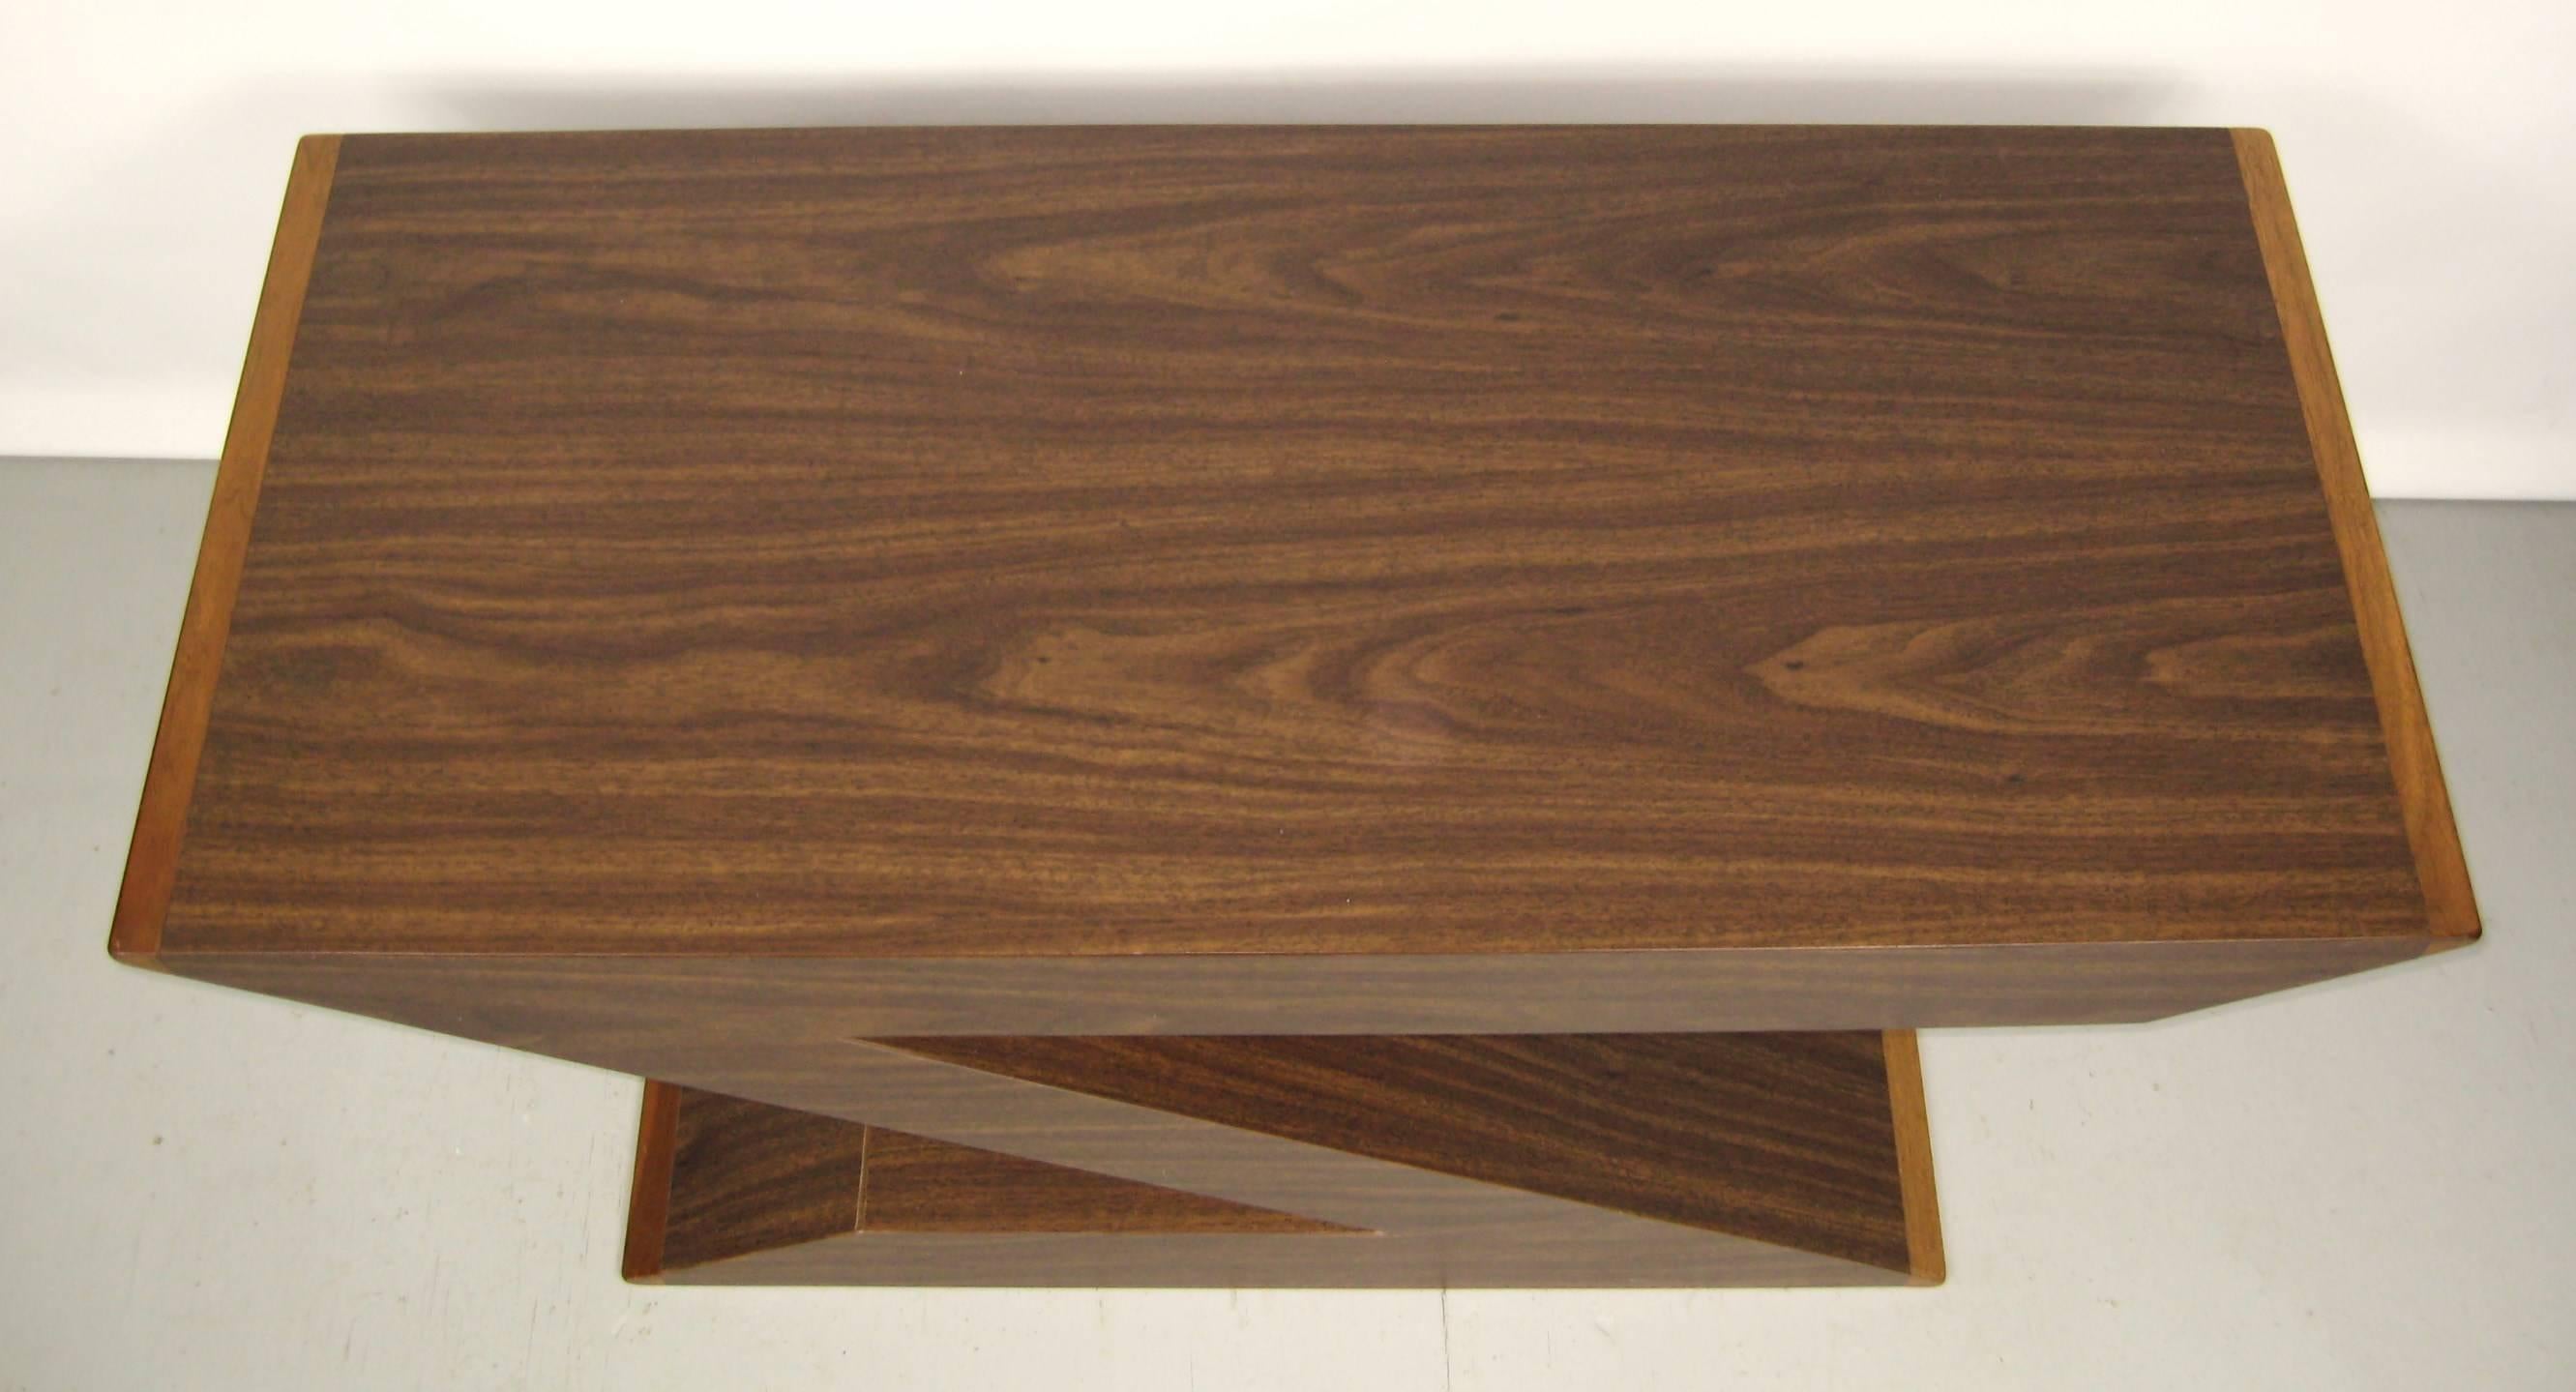 Stunning Mid-Century Modern Z-coffee table. Measures: 15.5 high, top is 39.5 in x 18 in,
base is 27.5 in x 18 in.
